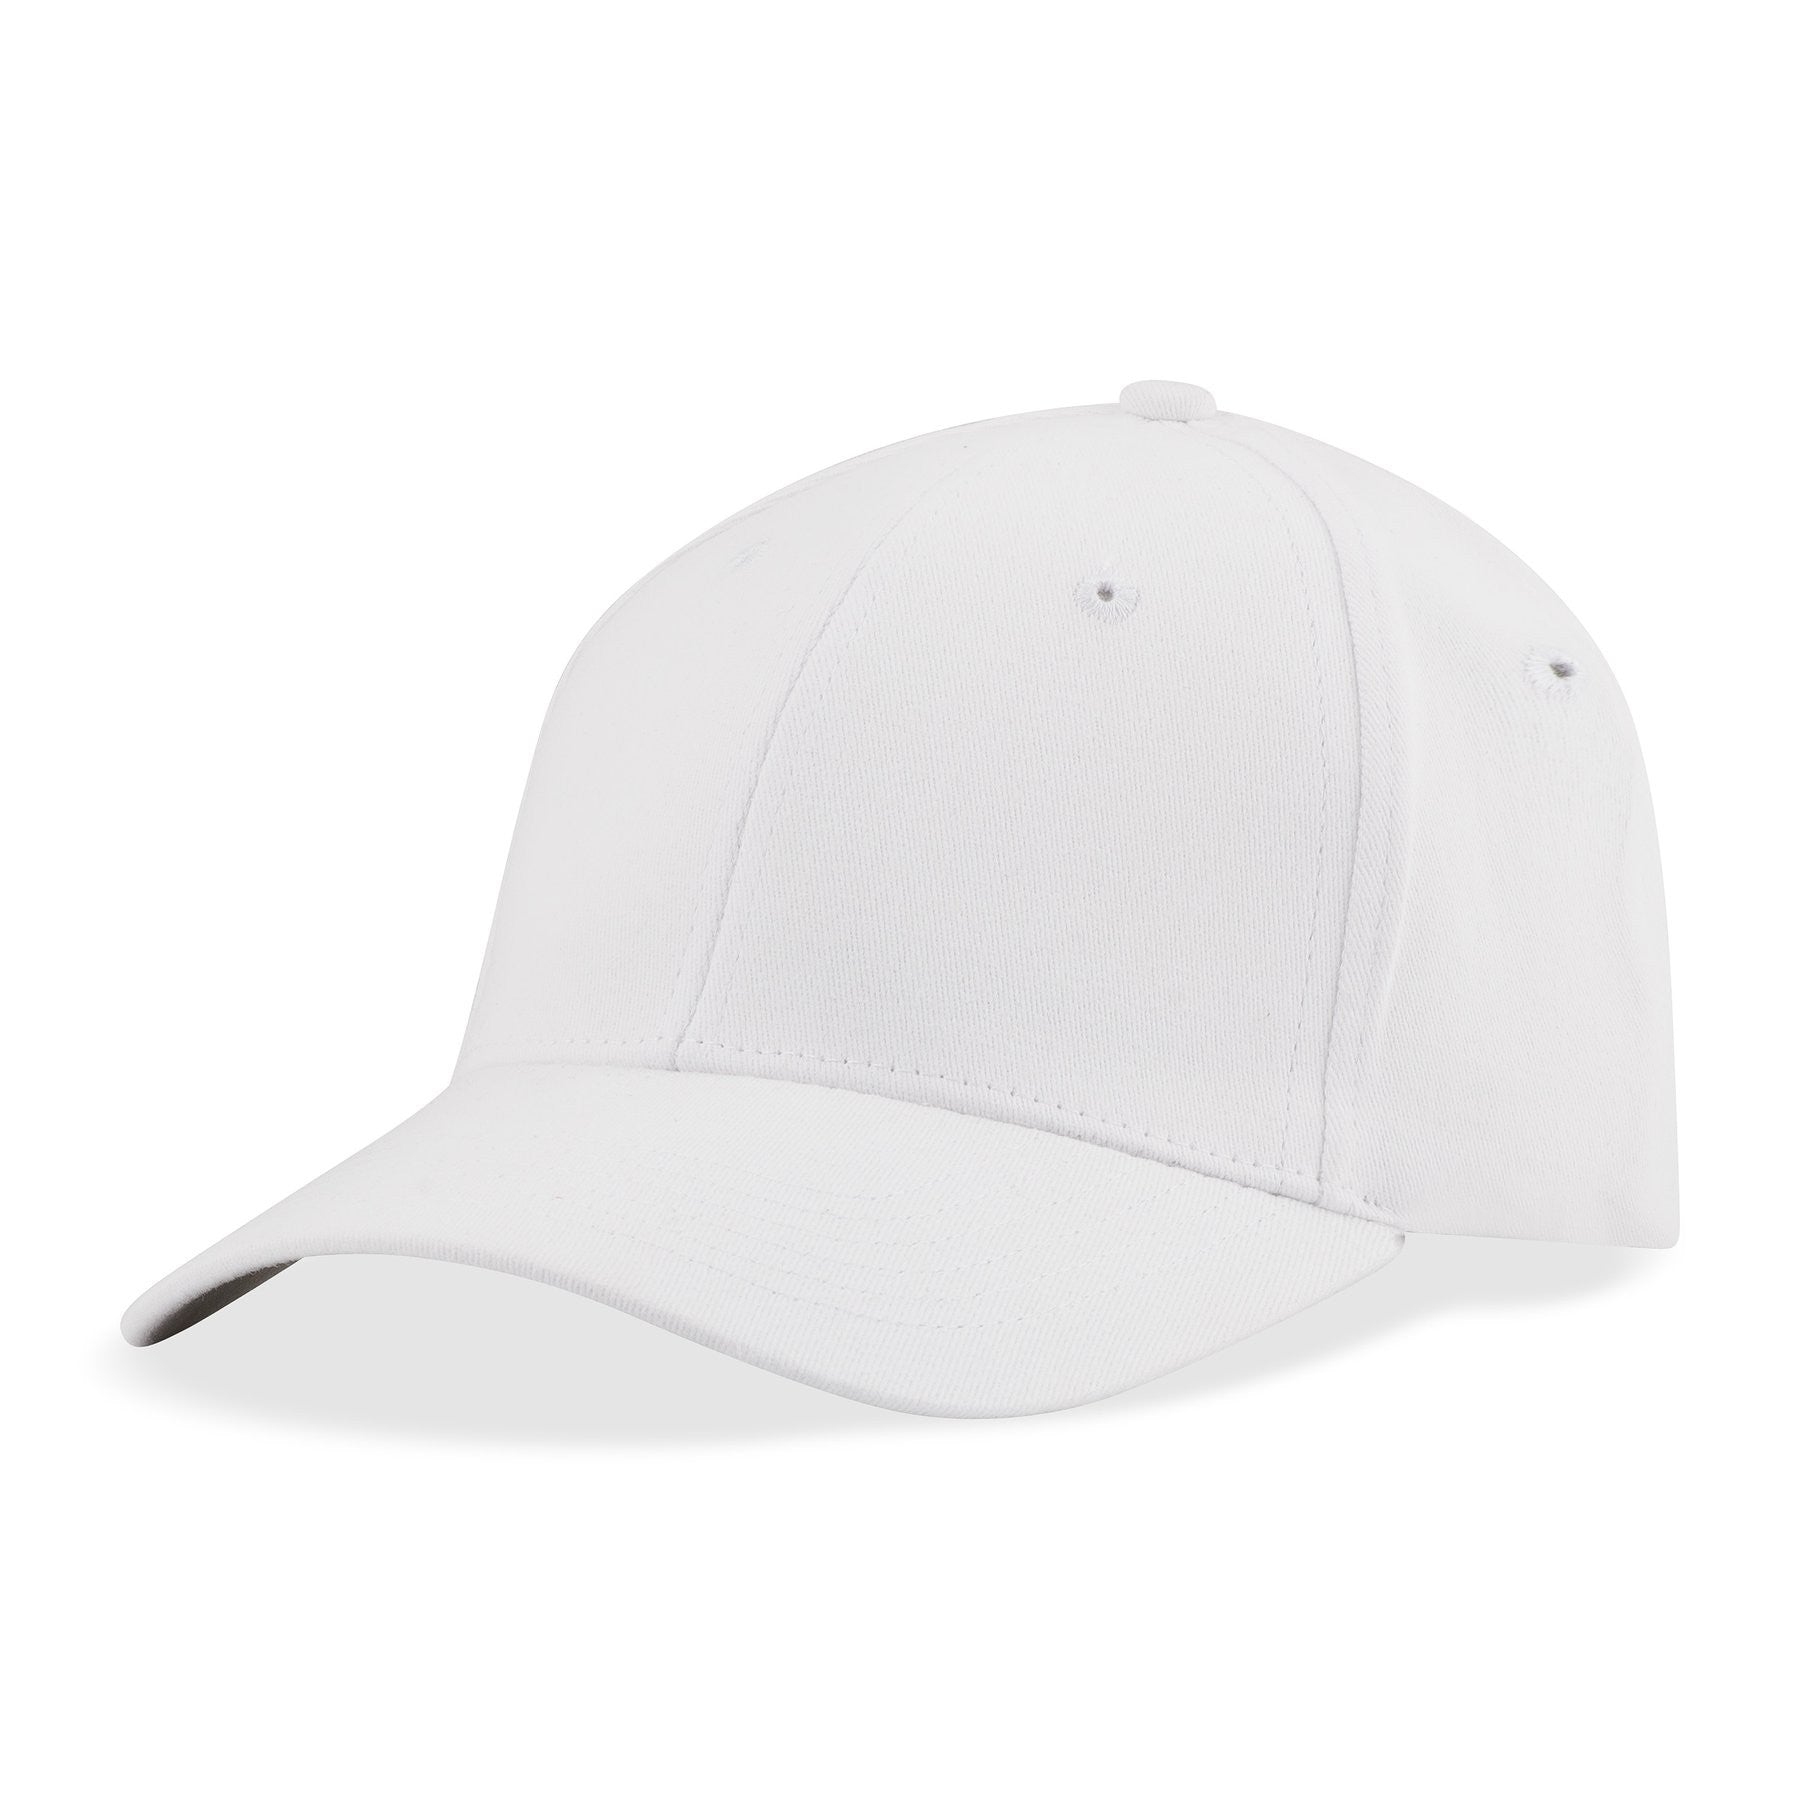 3000 Nu-Fit Pro-Style Cotton Spandex Fitted Cap - Budget Promotion Headware CA$ 18.39 White